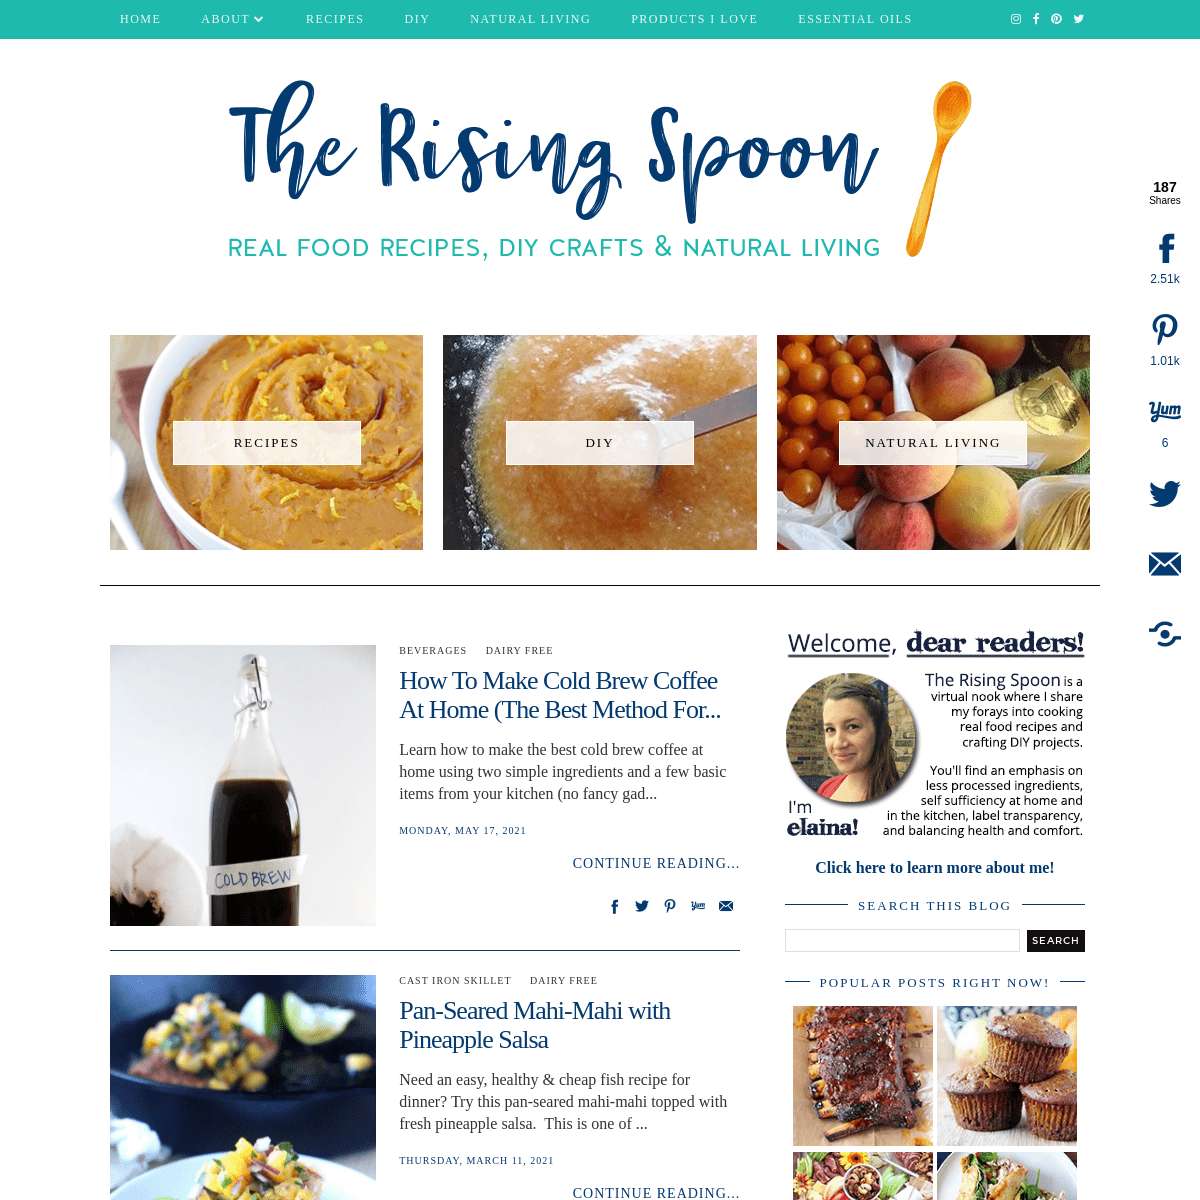 A complete backup of https://therisingspoon.com